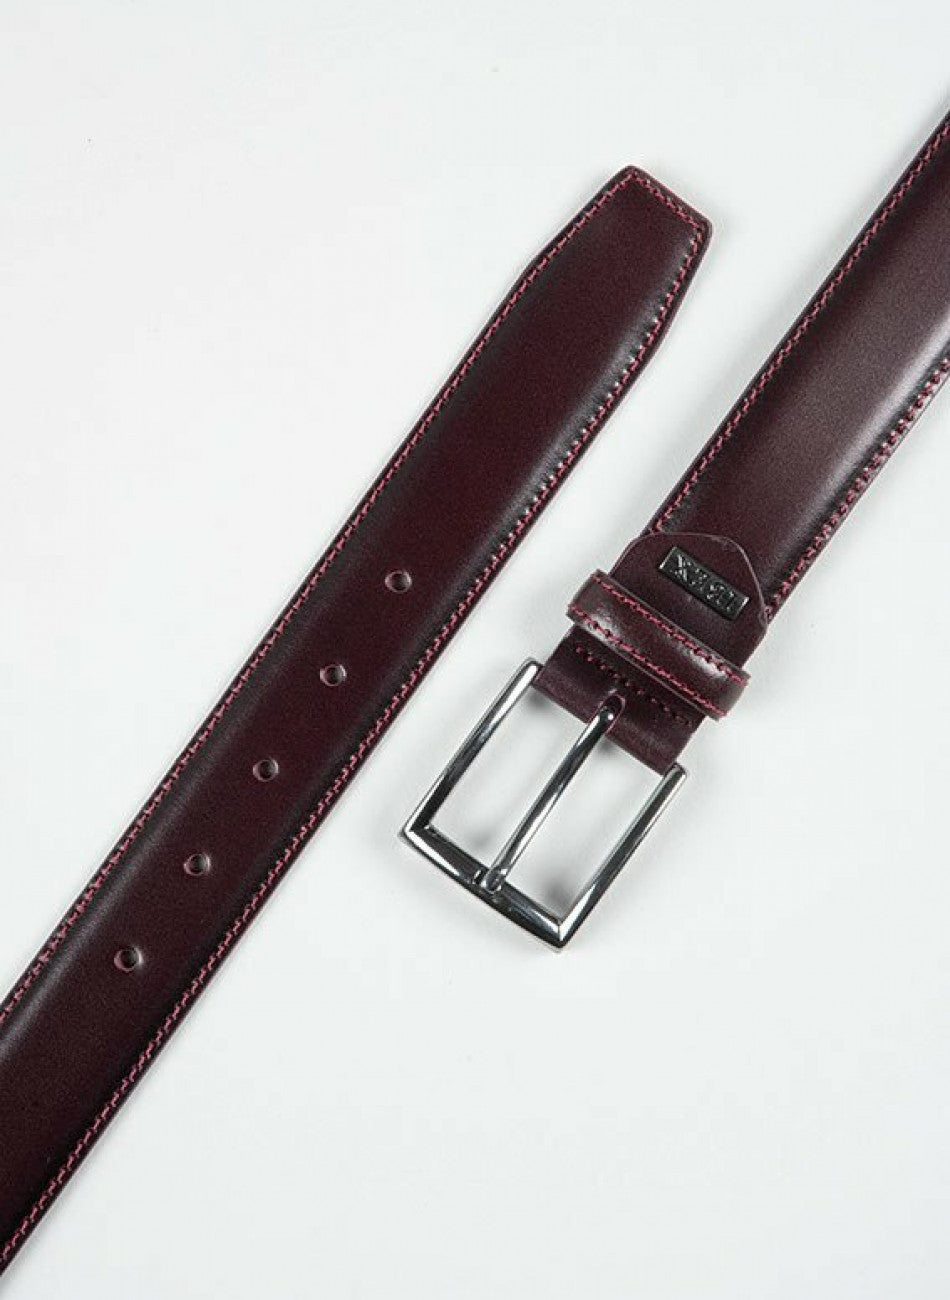 Ibex - Tan Leather Belt with Stitching